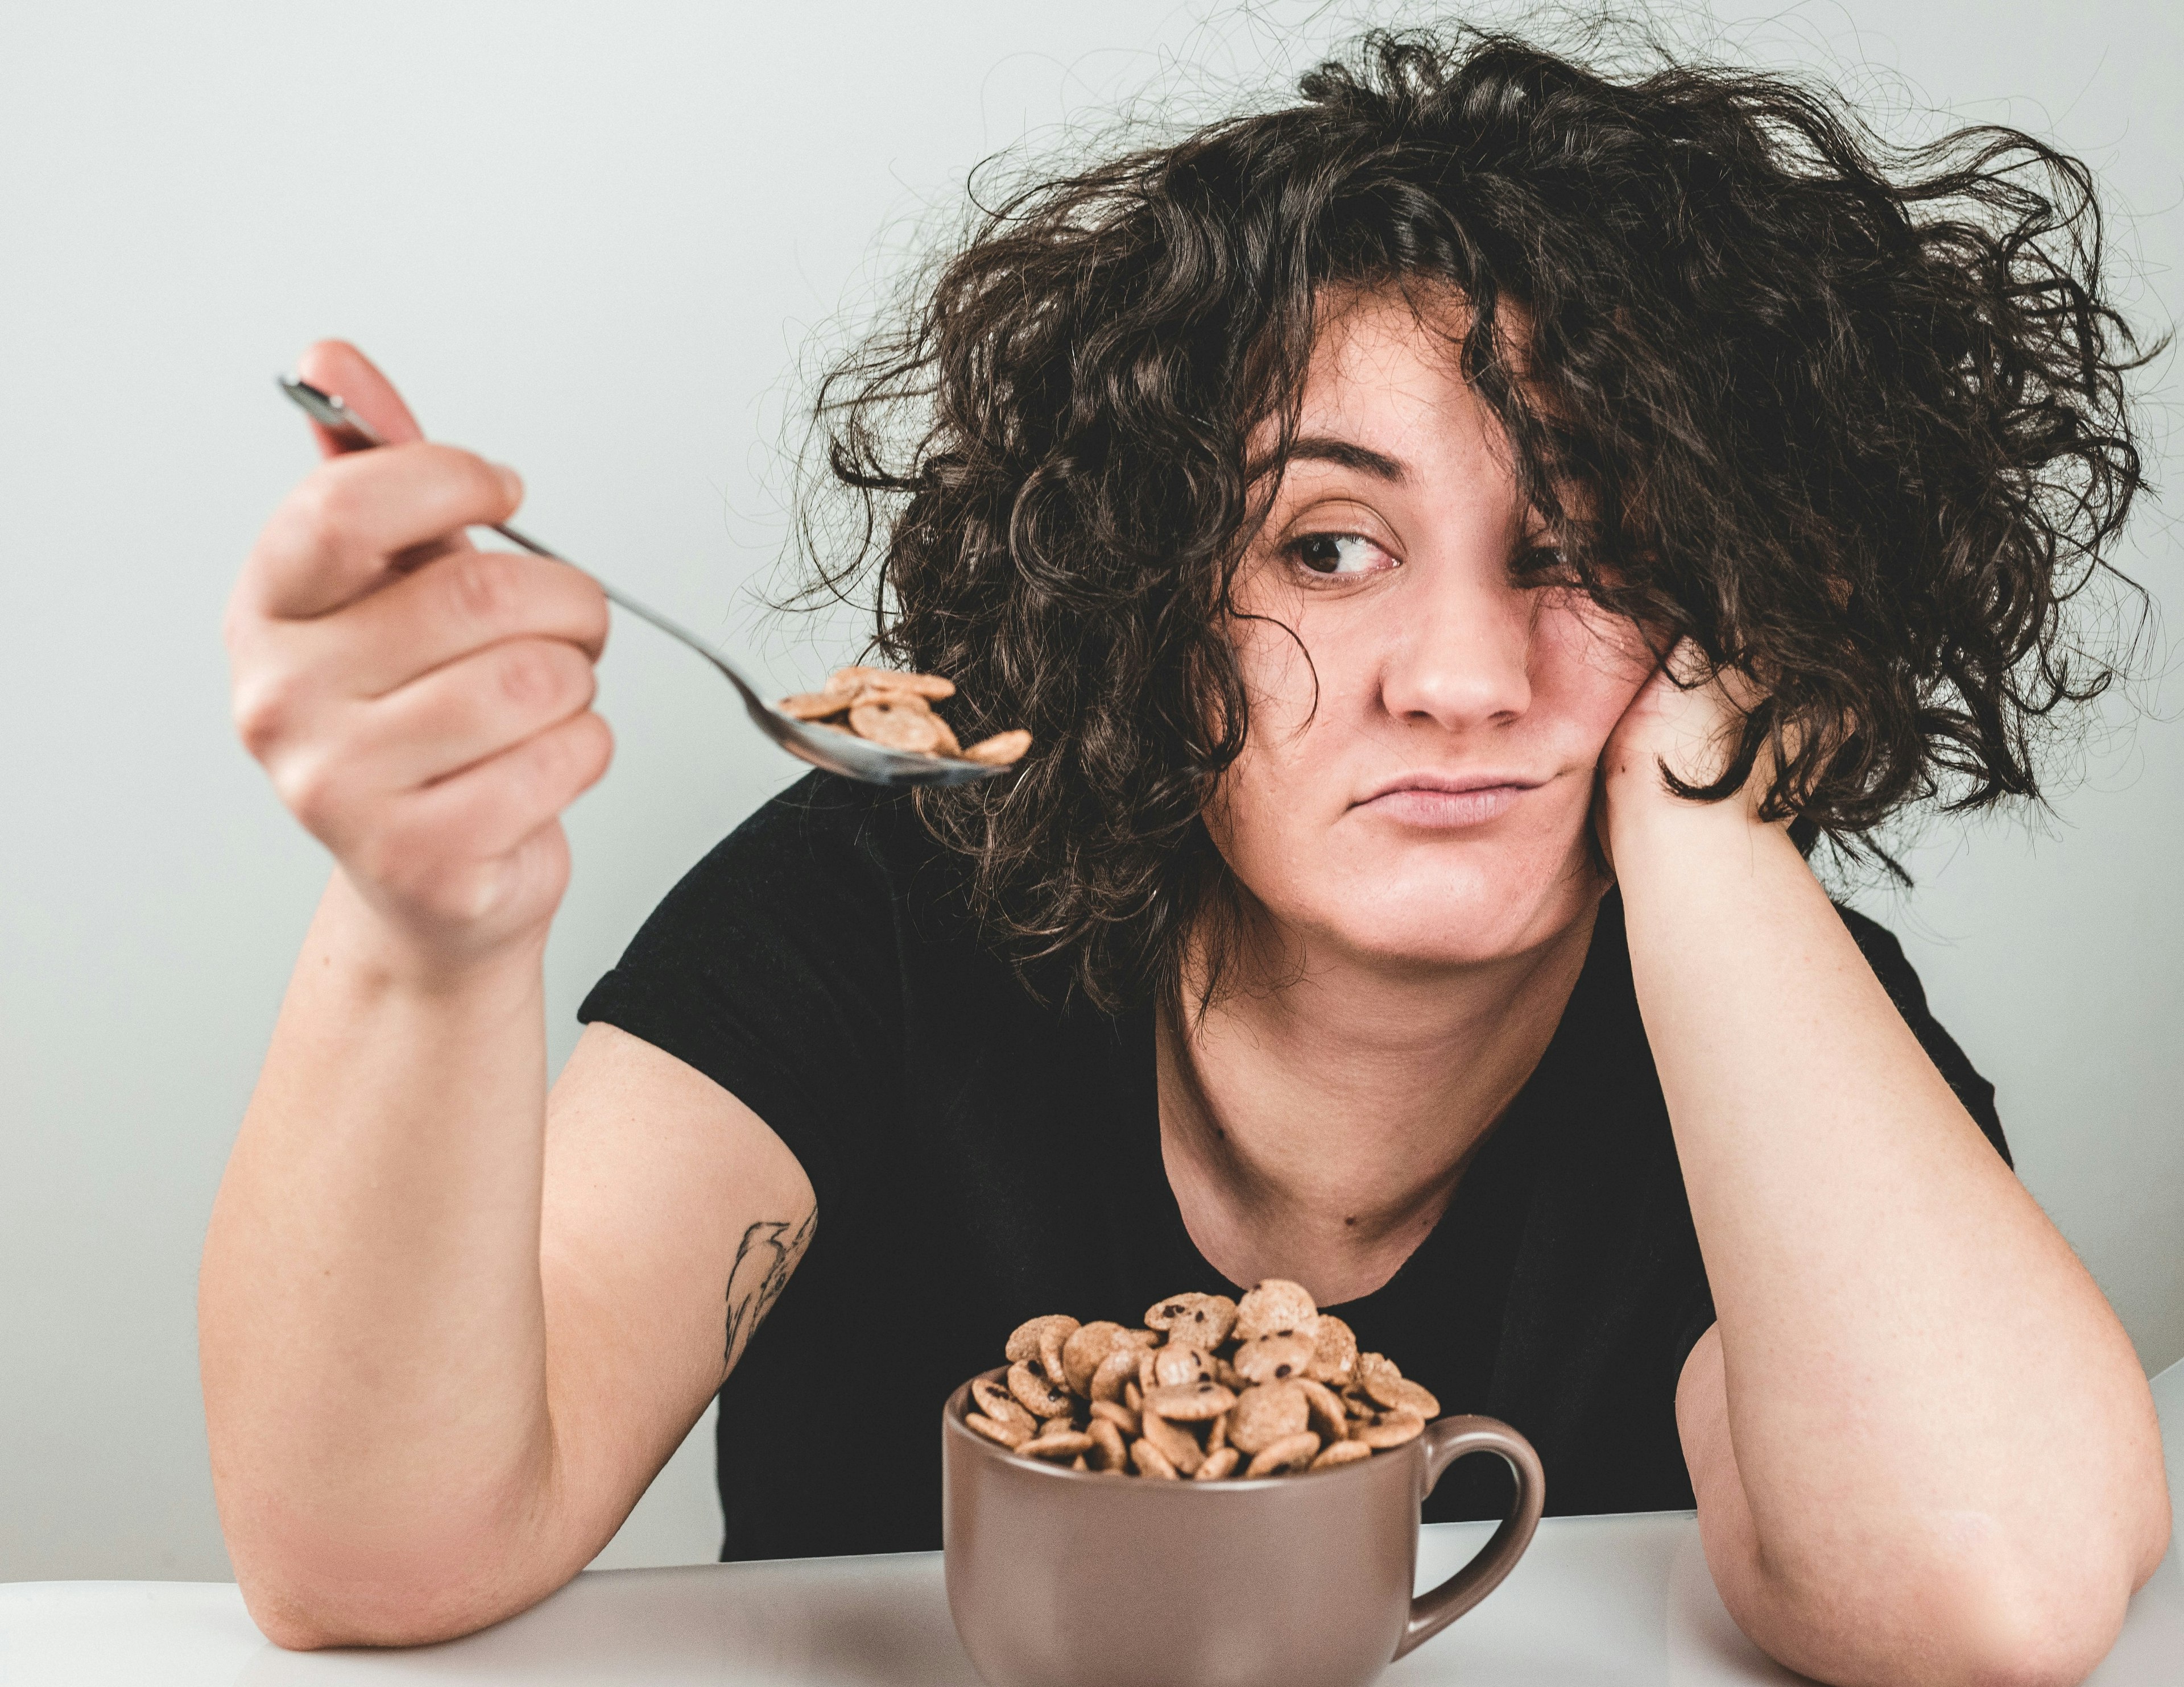 a stressed-looking woman eating from a mug of cereal